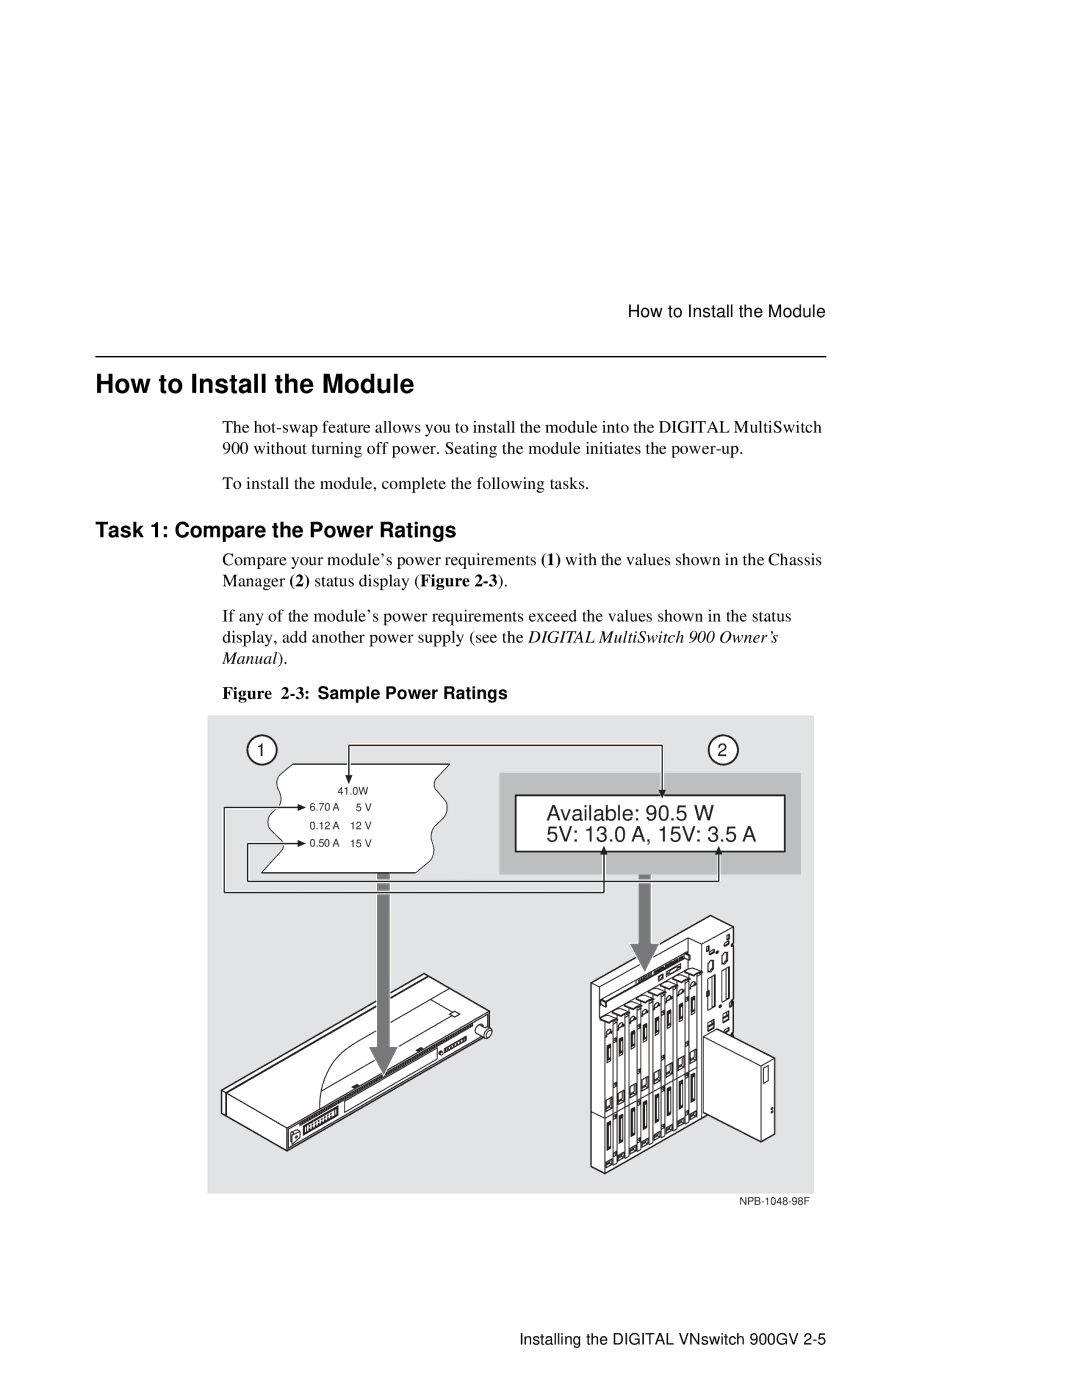 Network Technologies 900GV manual How to Install the Module, Task 1 Compare the Power Ratings 